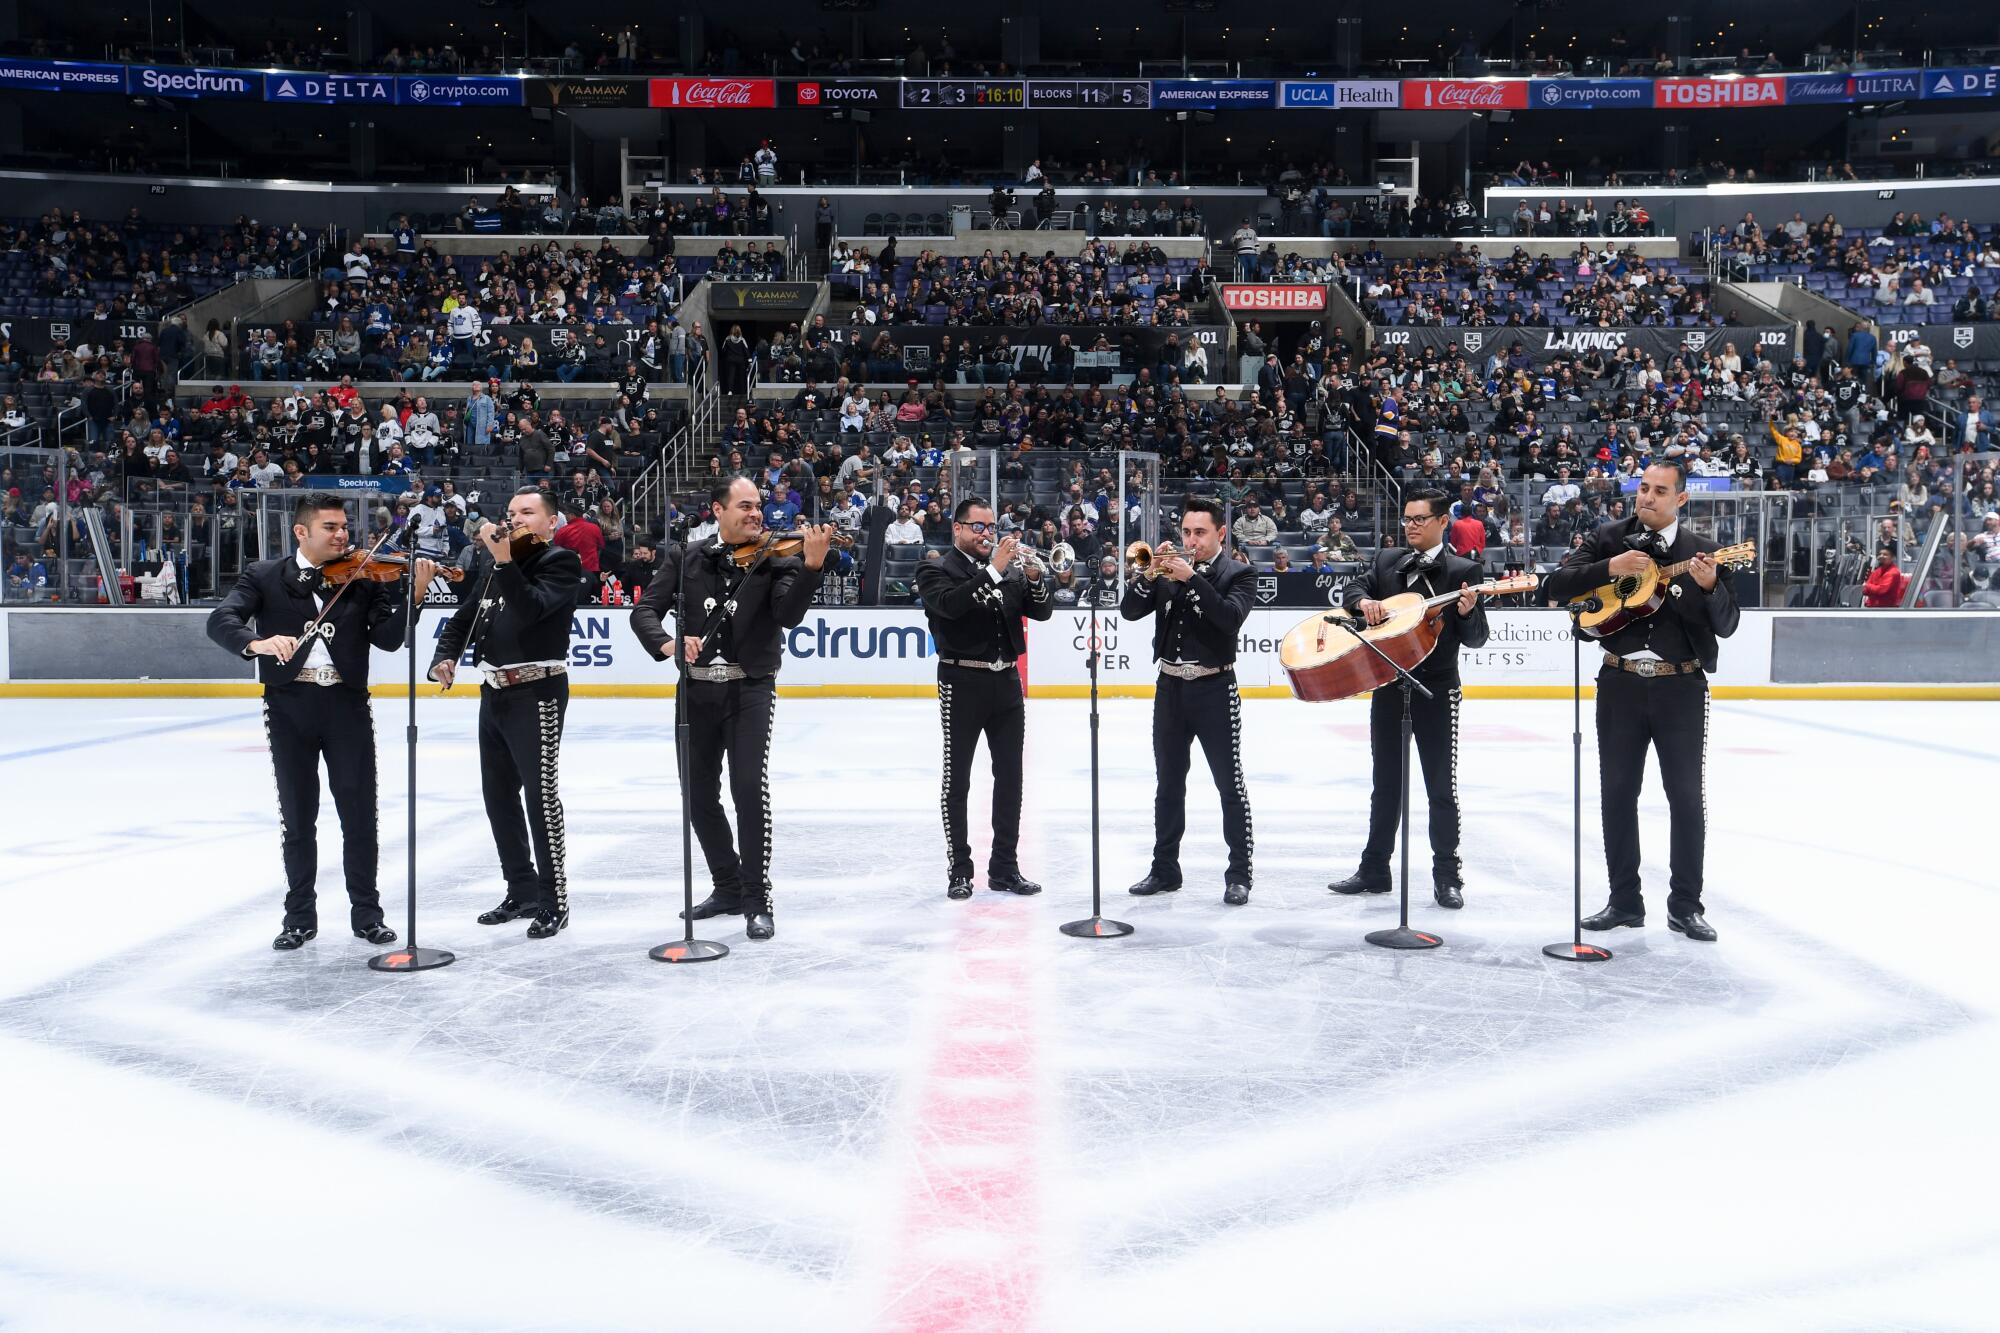 Mariachis perform to celebrate Día de Los Muertos night during the second period of a Kings game